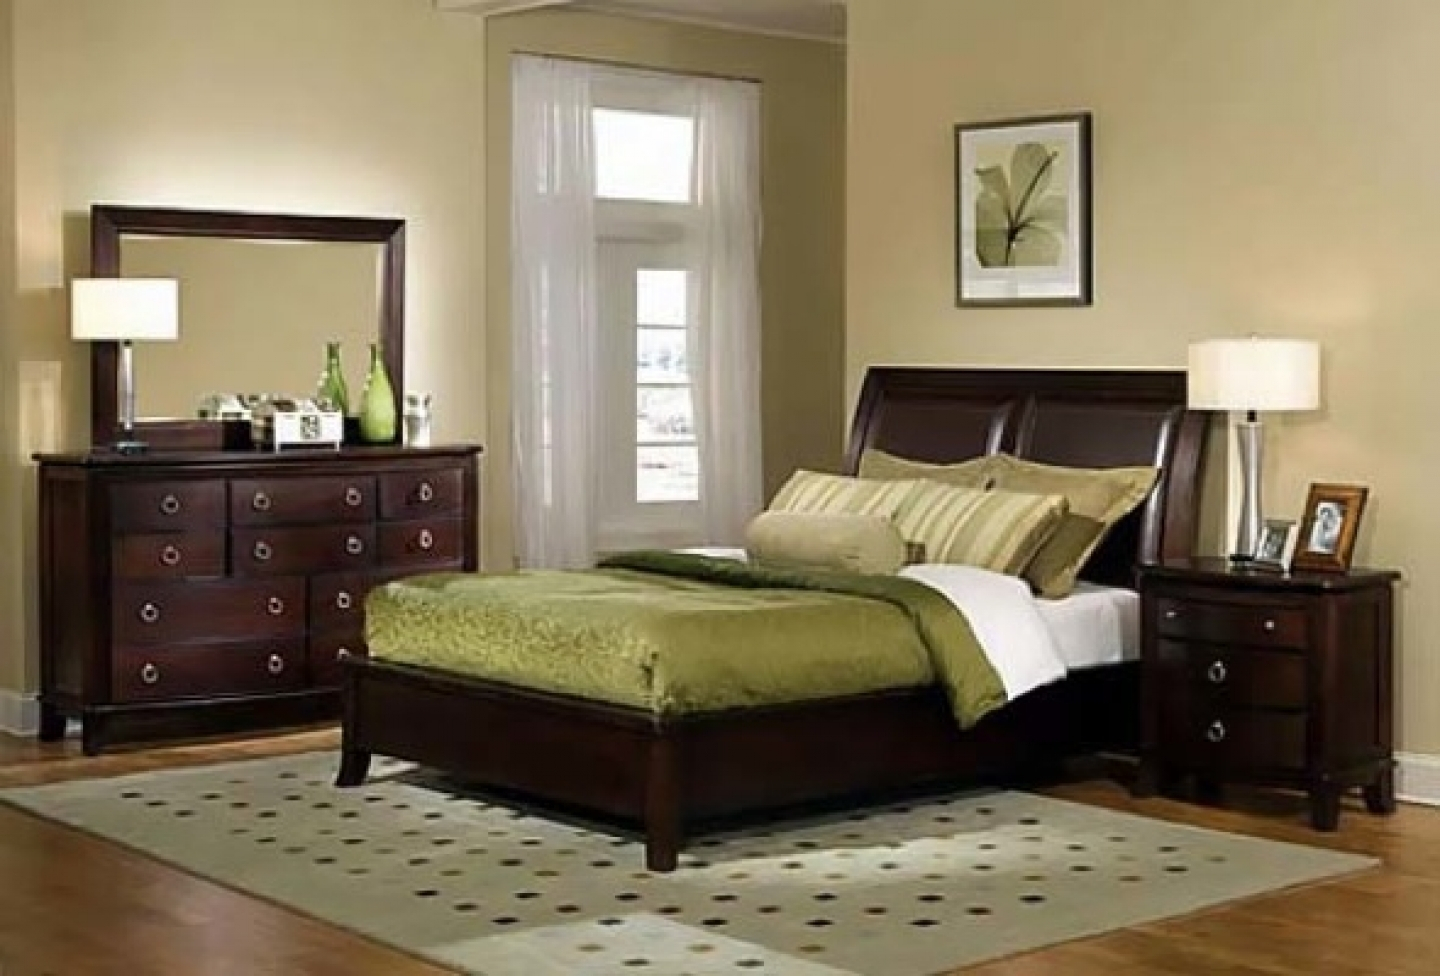 Impressive Bedroom Colors 11 Master Bedroom Paint Color Ideas pertaining to proportions 1440 X 976